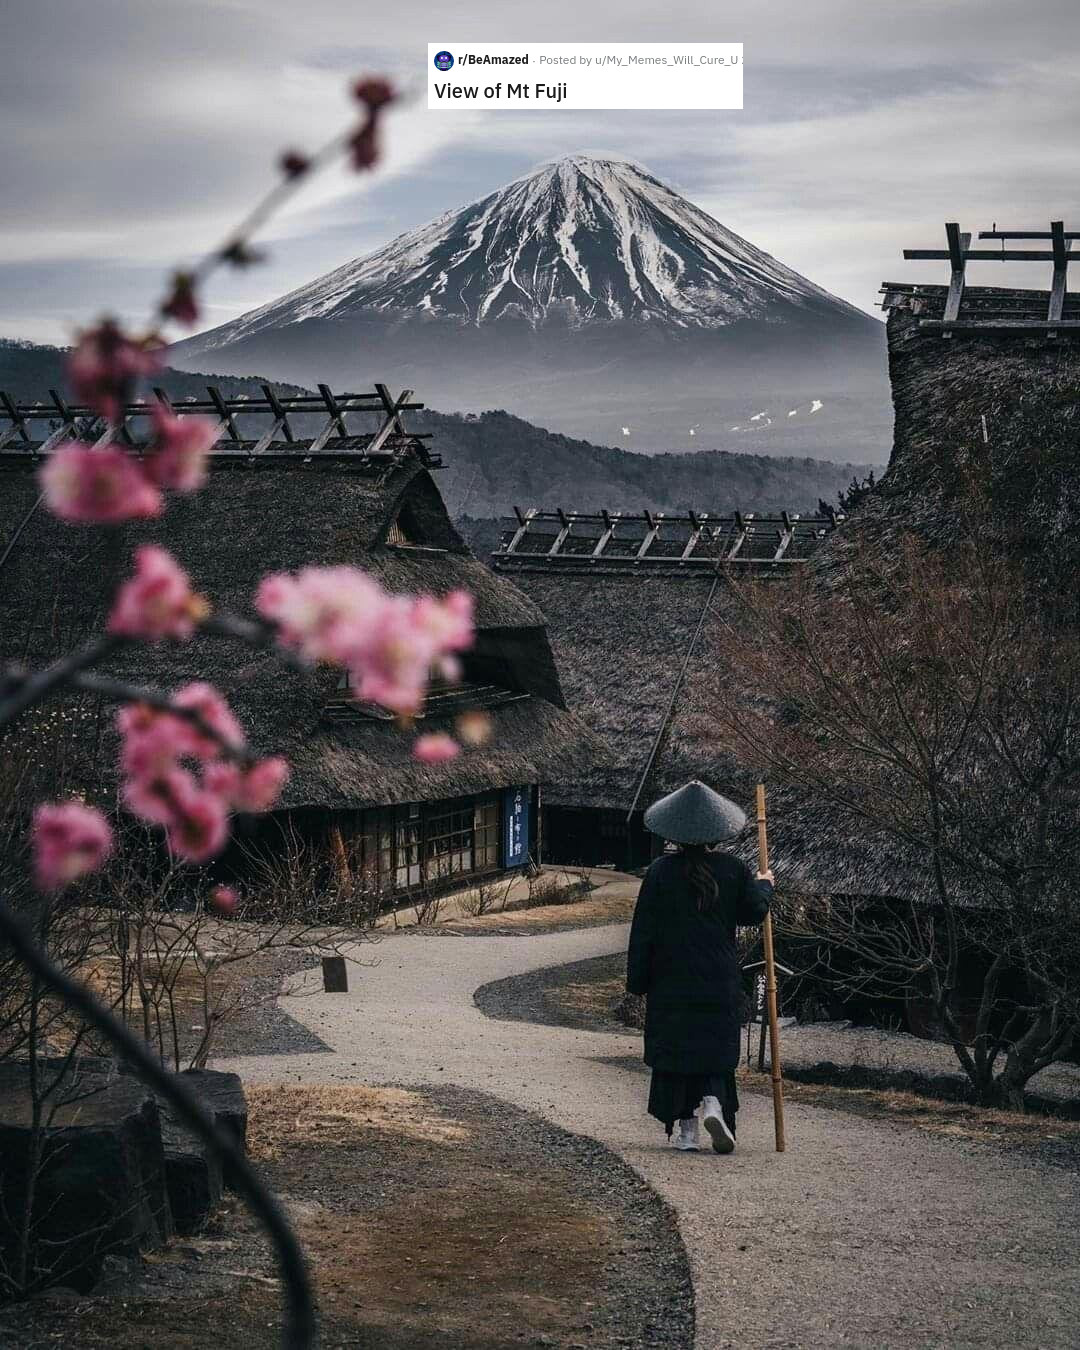 rBeAmazed Posted by uMy_Memes_Will_Cure_U View of Mt Fuji